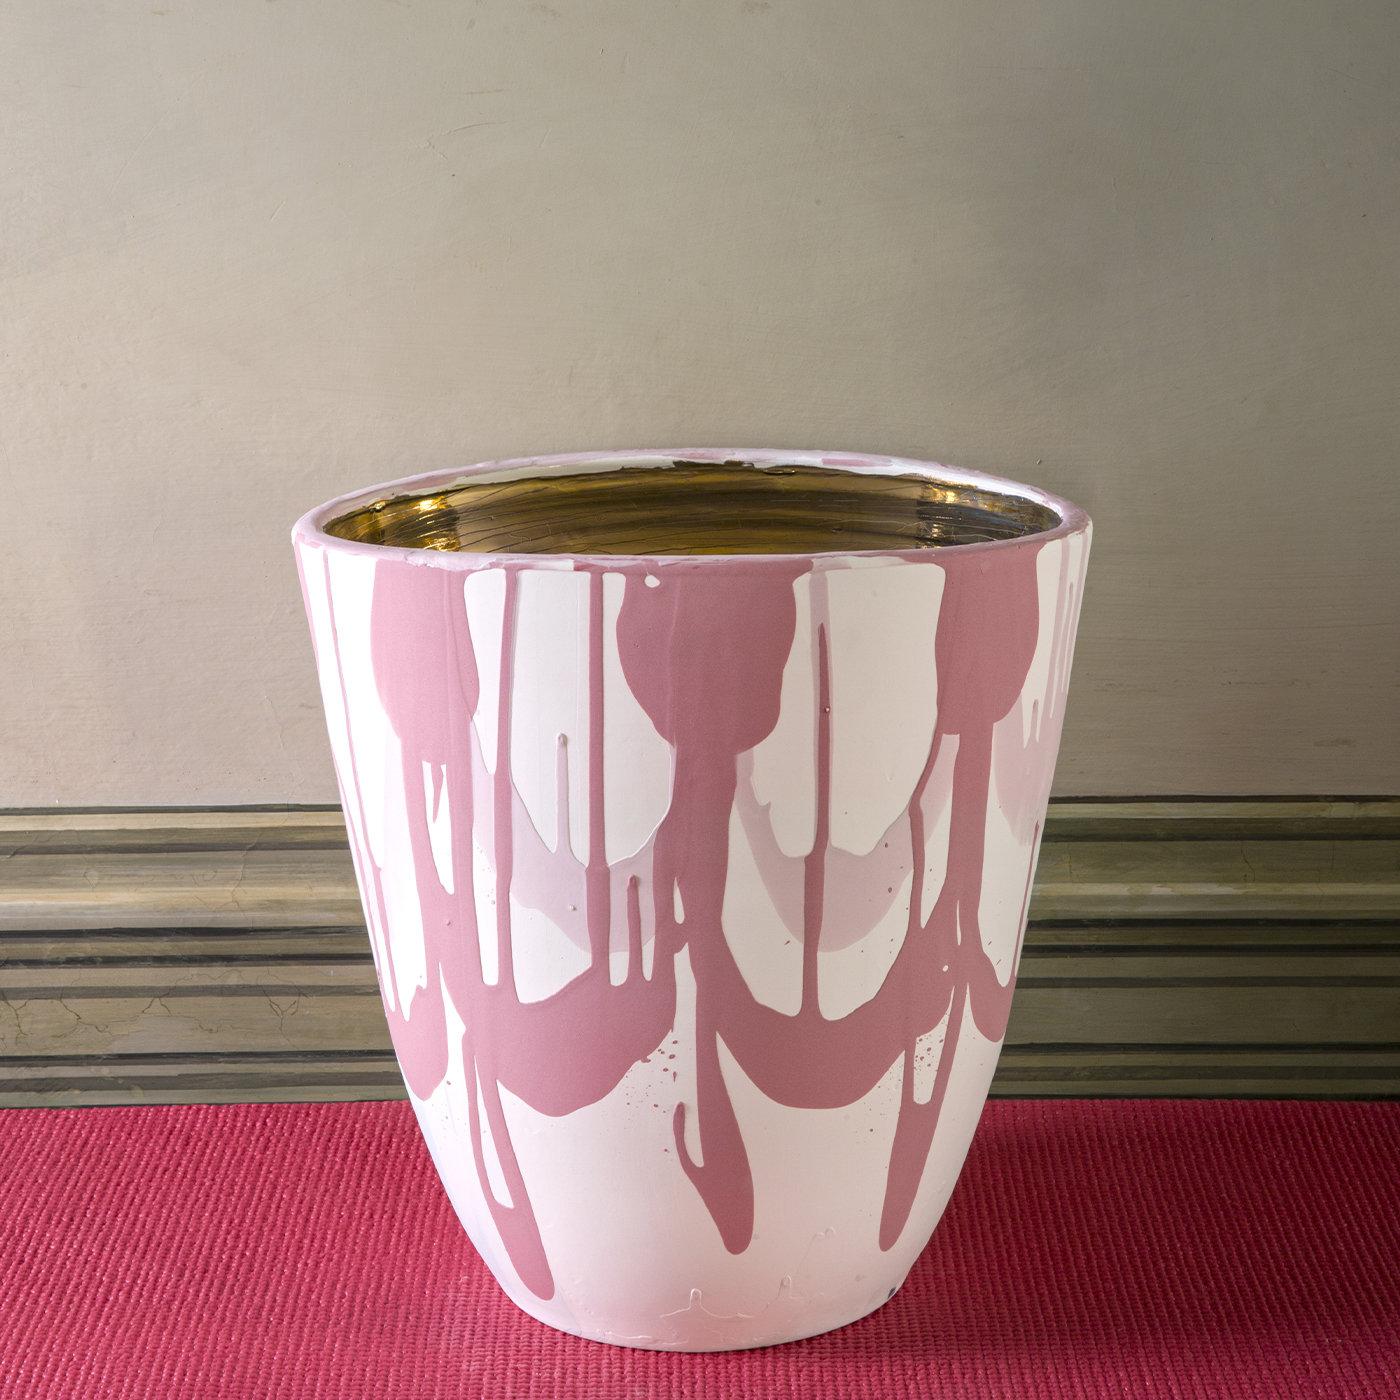 This vase features a stunning opaque slipware exterior whose decorations resemble the flourishes on a Neoclassical vase. Delicate yet dynamic pink brushstrokes run across its white surface. The interior is entirely in lustrous gold. The item has a